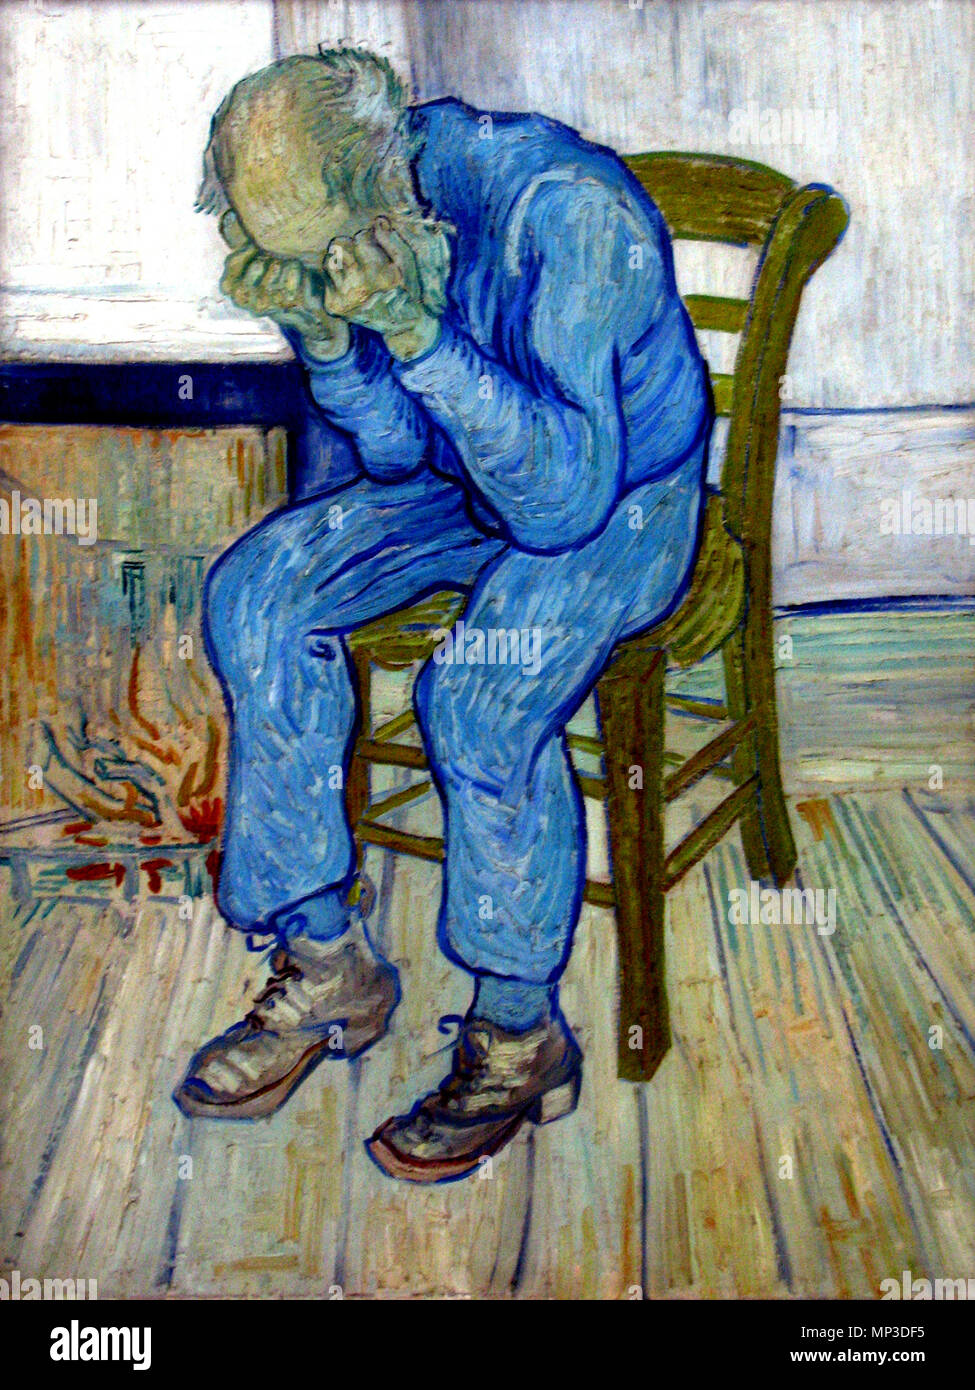 Sorrowing old man ('At Eternity's Gate')   Saint-Rémy, May 1890.   1224 1890-05 van Gogh At Eternitys Gate anagoria Stock Photo